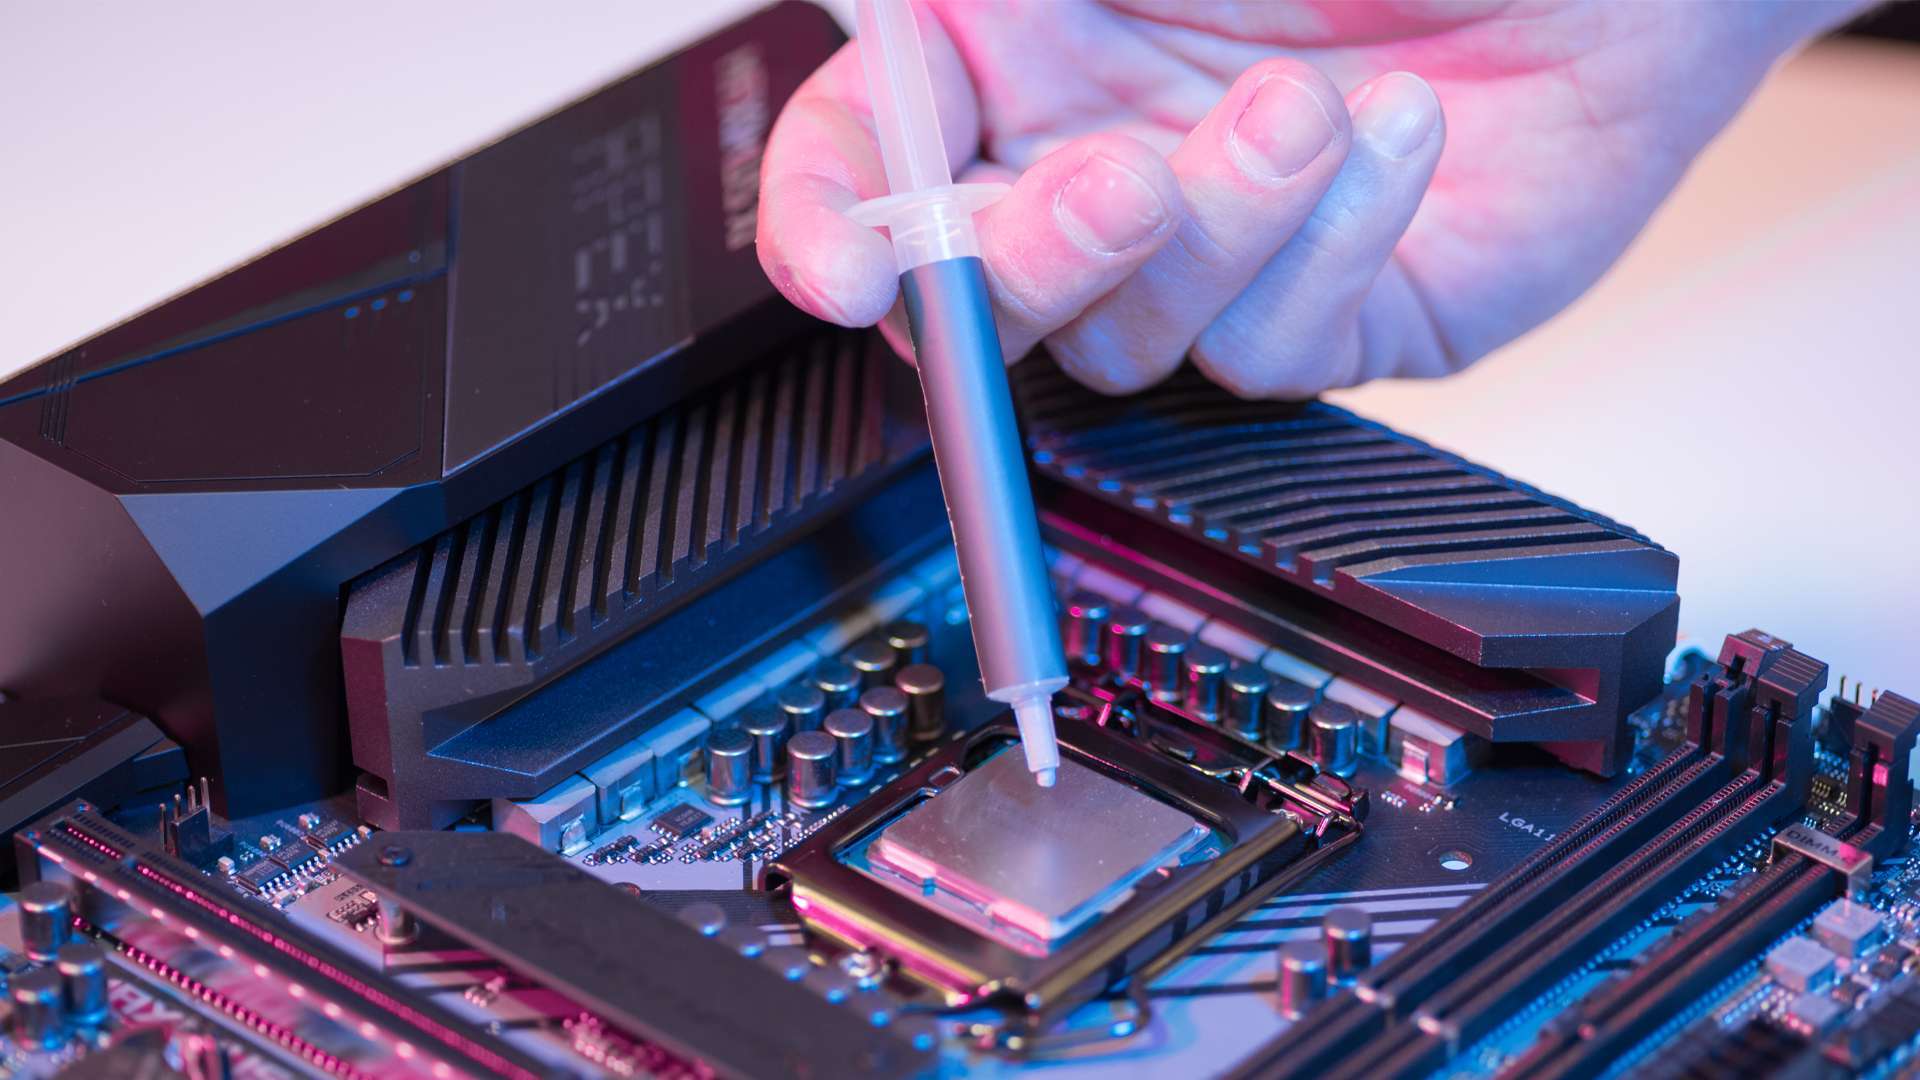 How To Apply Thermal Paste And How It Works To Make Sure Your Processor Is Properly Cooled